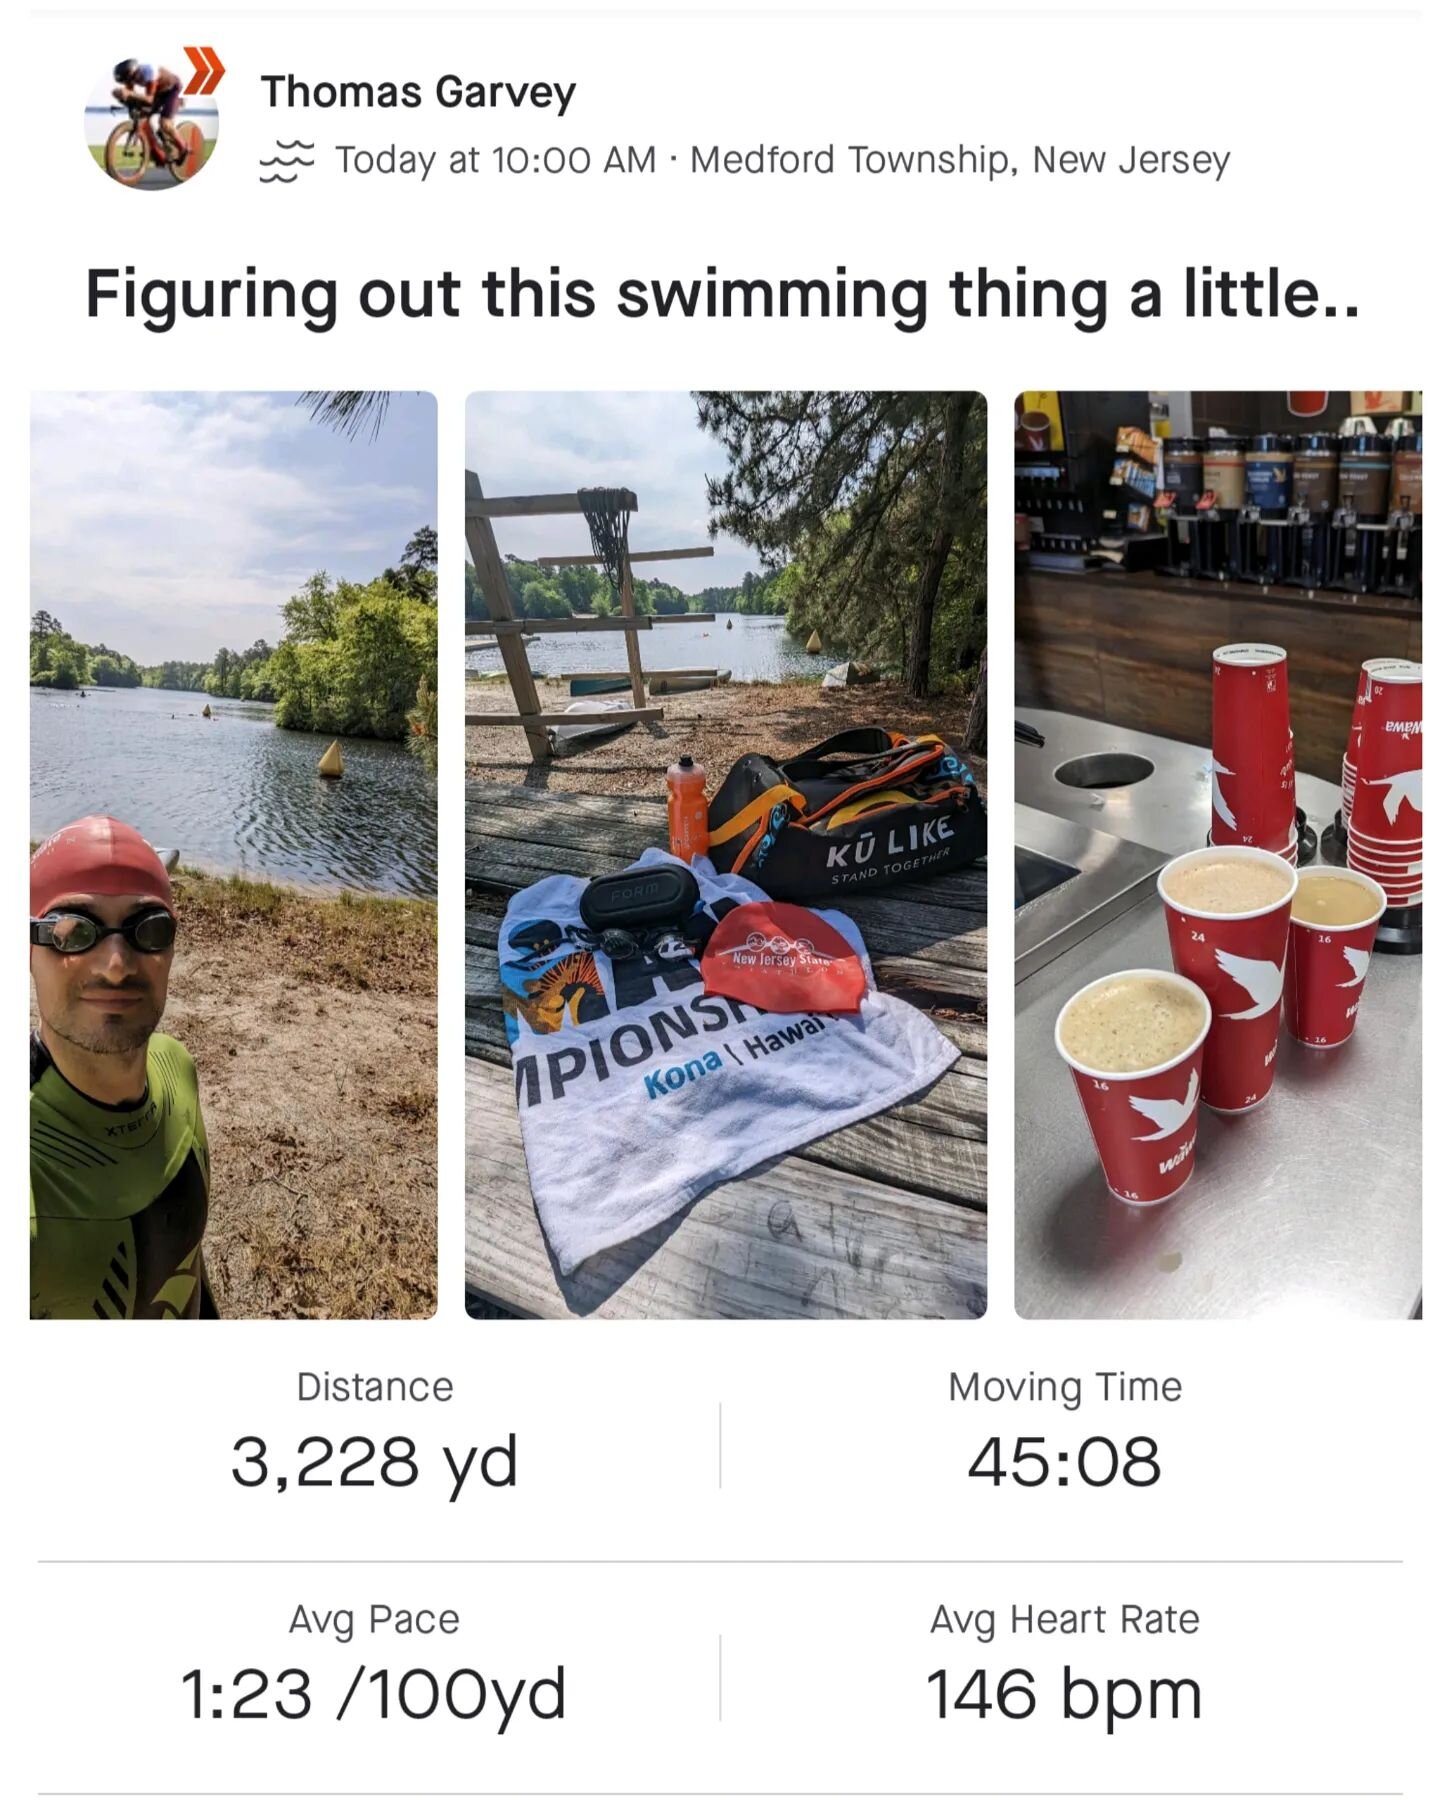 That #Swimtervention is starting to pay off just in time. Next scheduled stop is the #NJStateTri then off to my IM pro debut at #IMMaine703. Still need to pick up the swim pace a bit before then, but trending in the right direction!
..
..
#IronmanTra